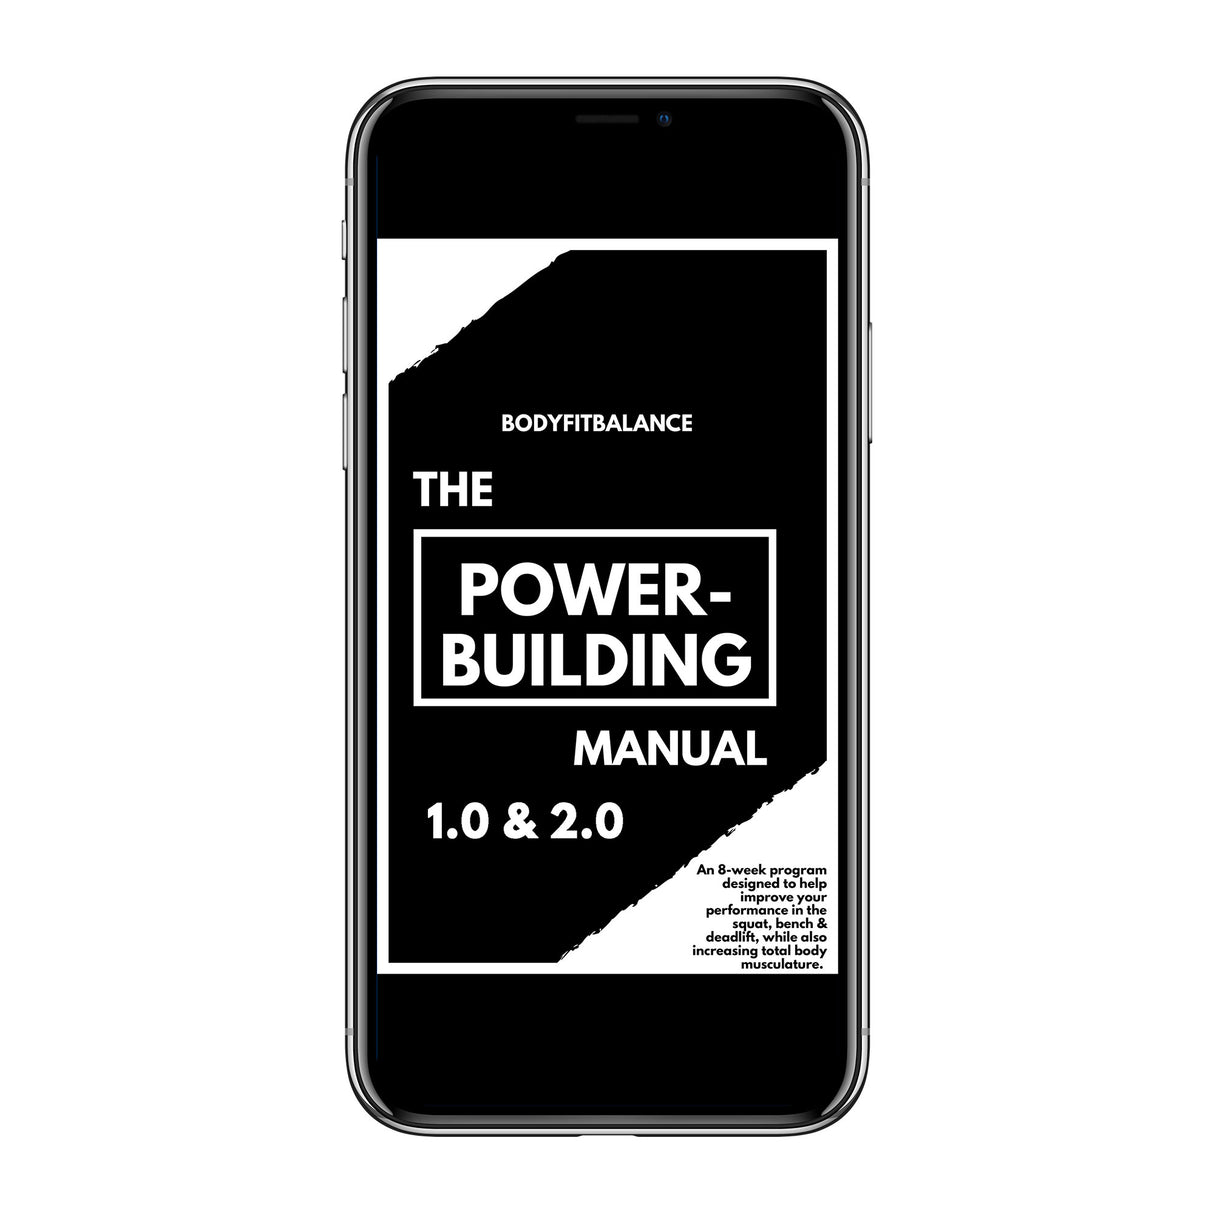 THE POWER-BUILDING MANUAL - PDF ONLY